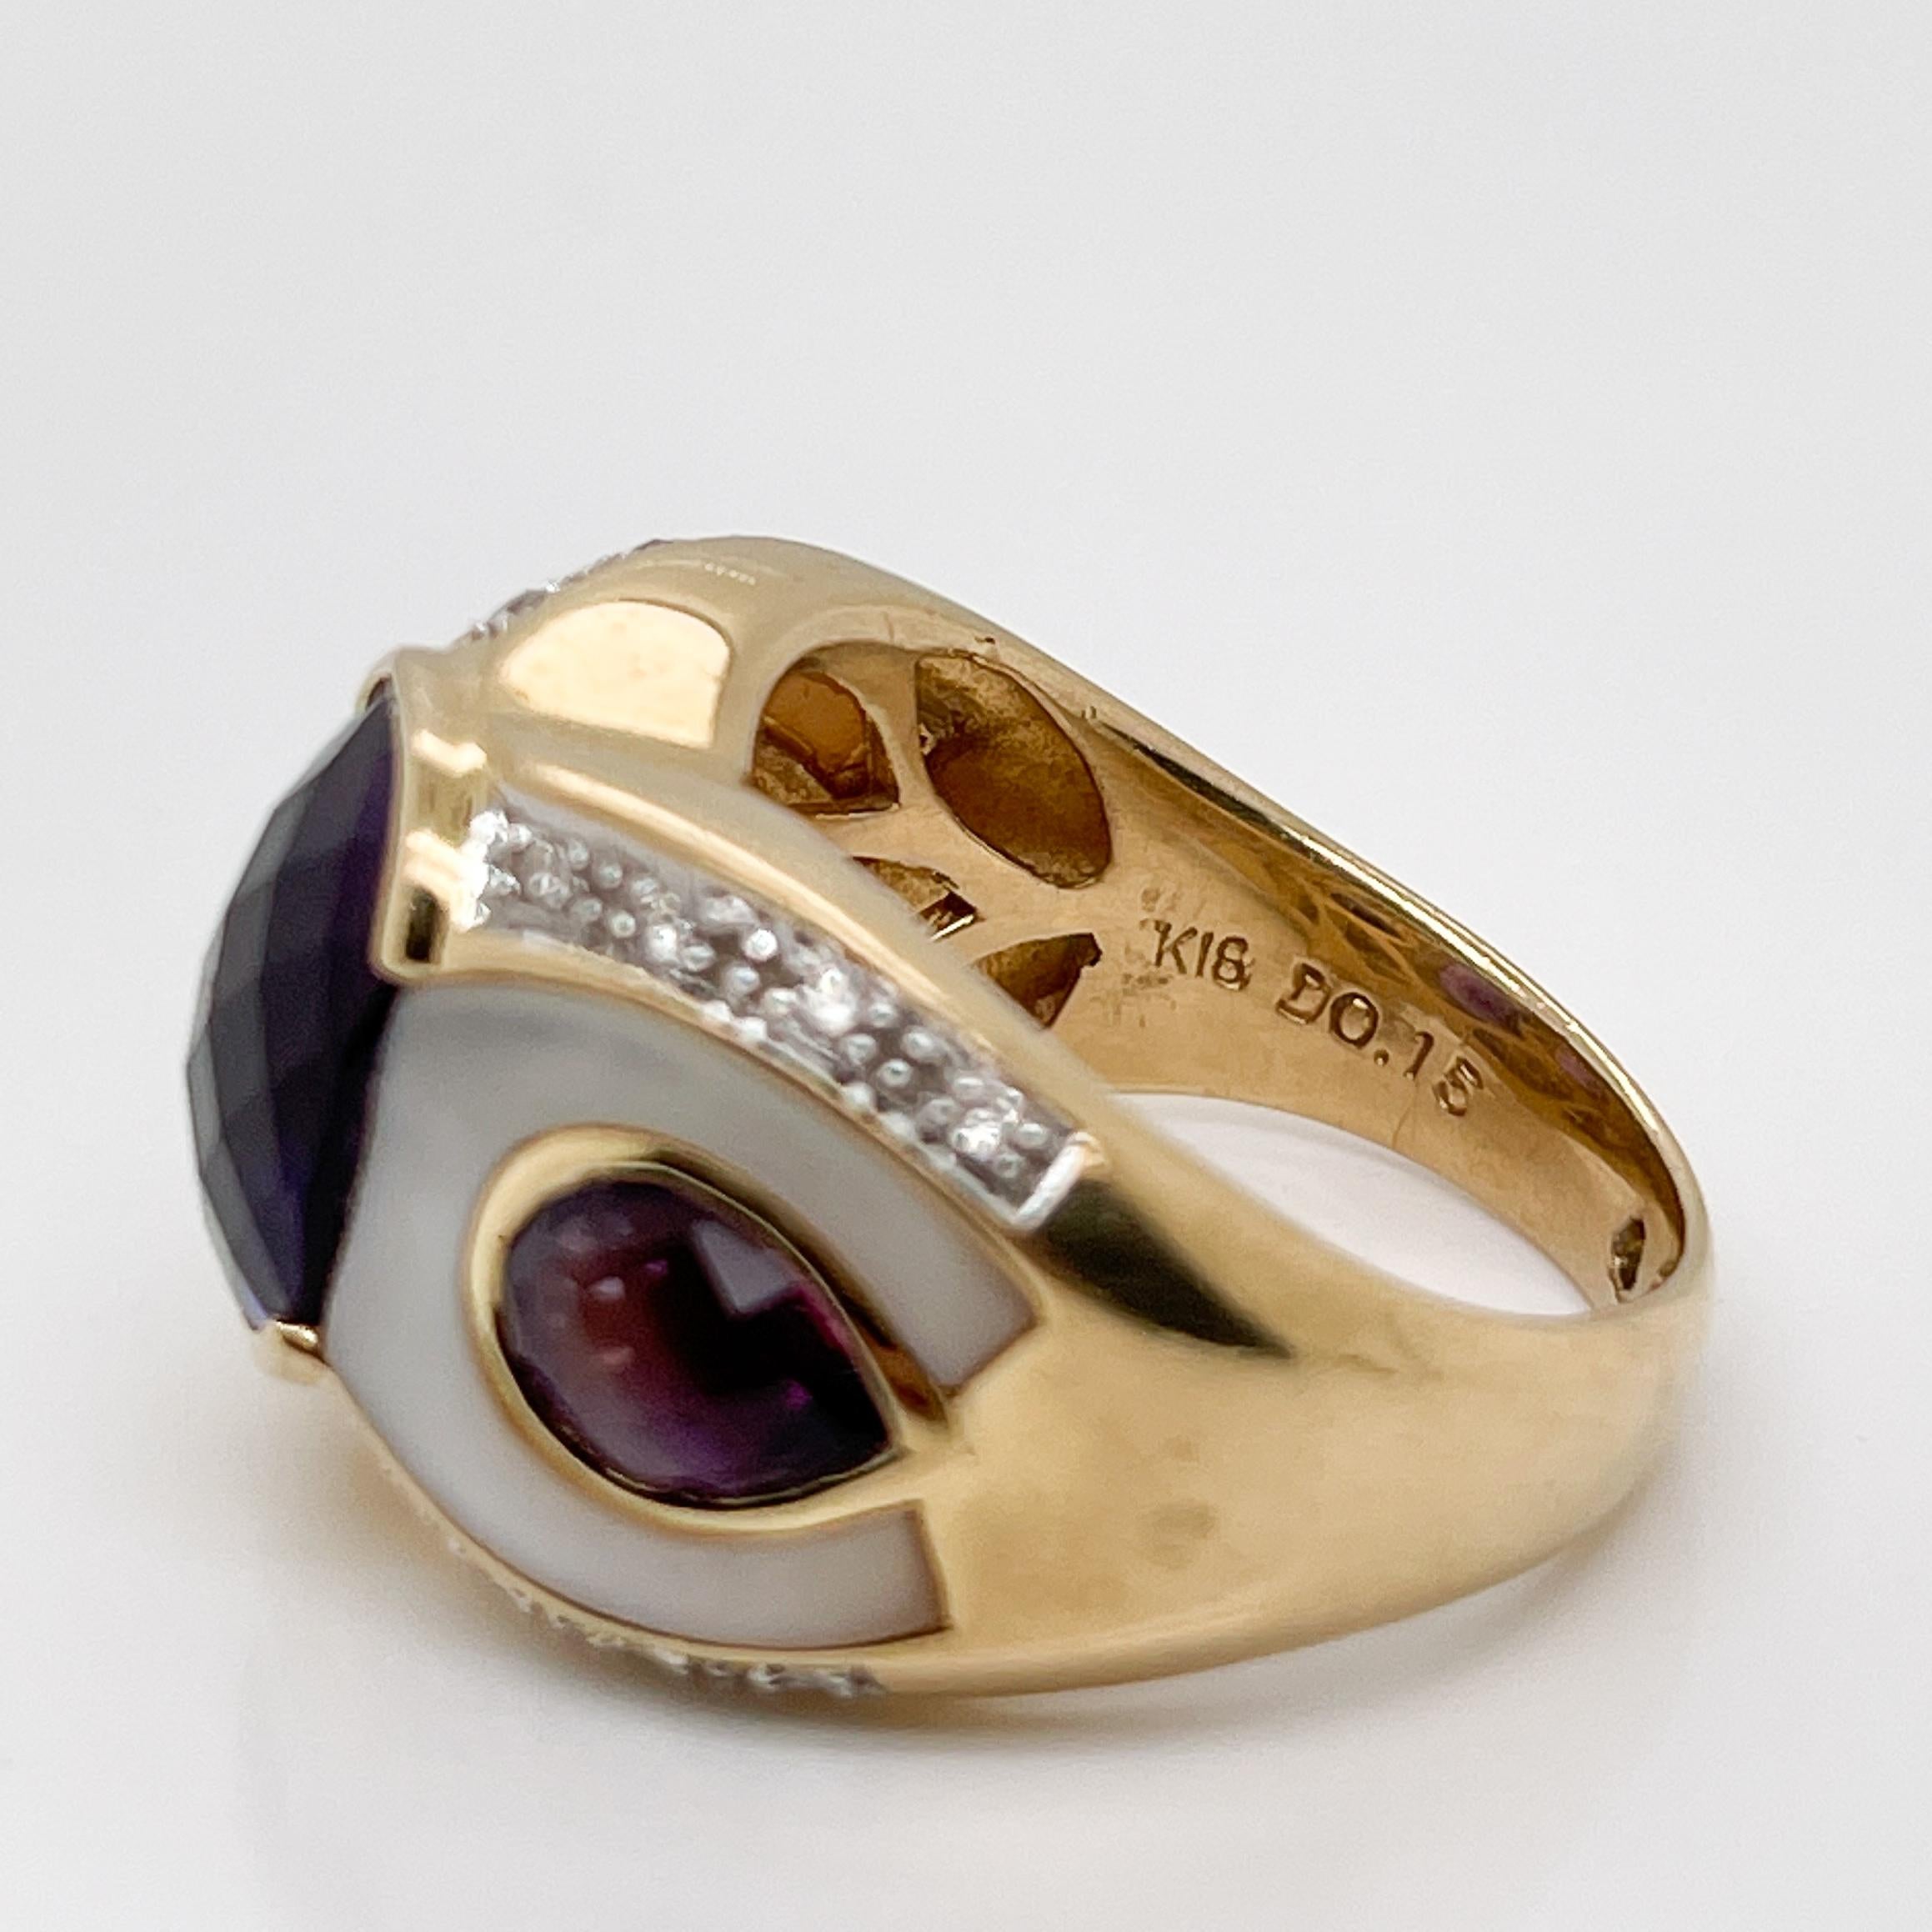 Owl/Parrot Bird Cocktail Ring in 18k Gold, Mother of Pearl, Diamond & Amethyst For Sale 5